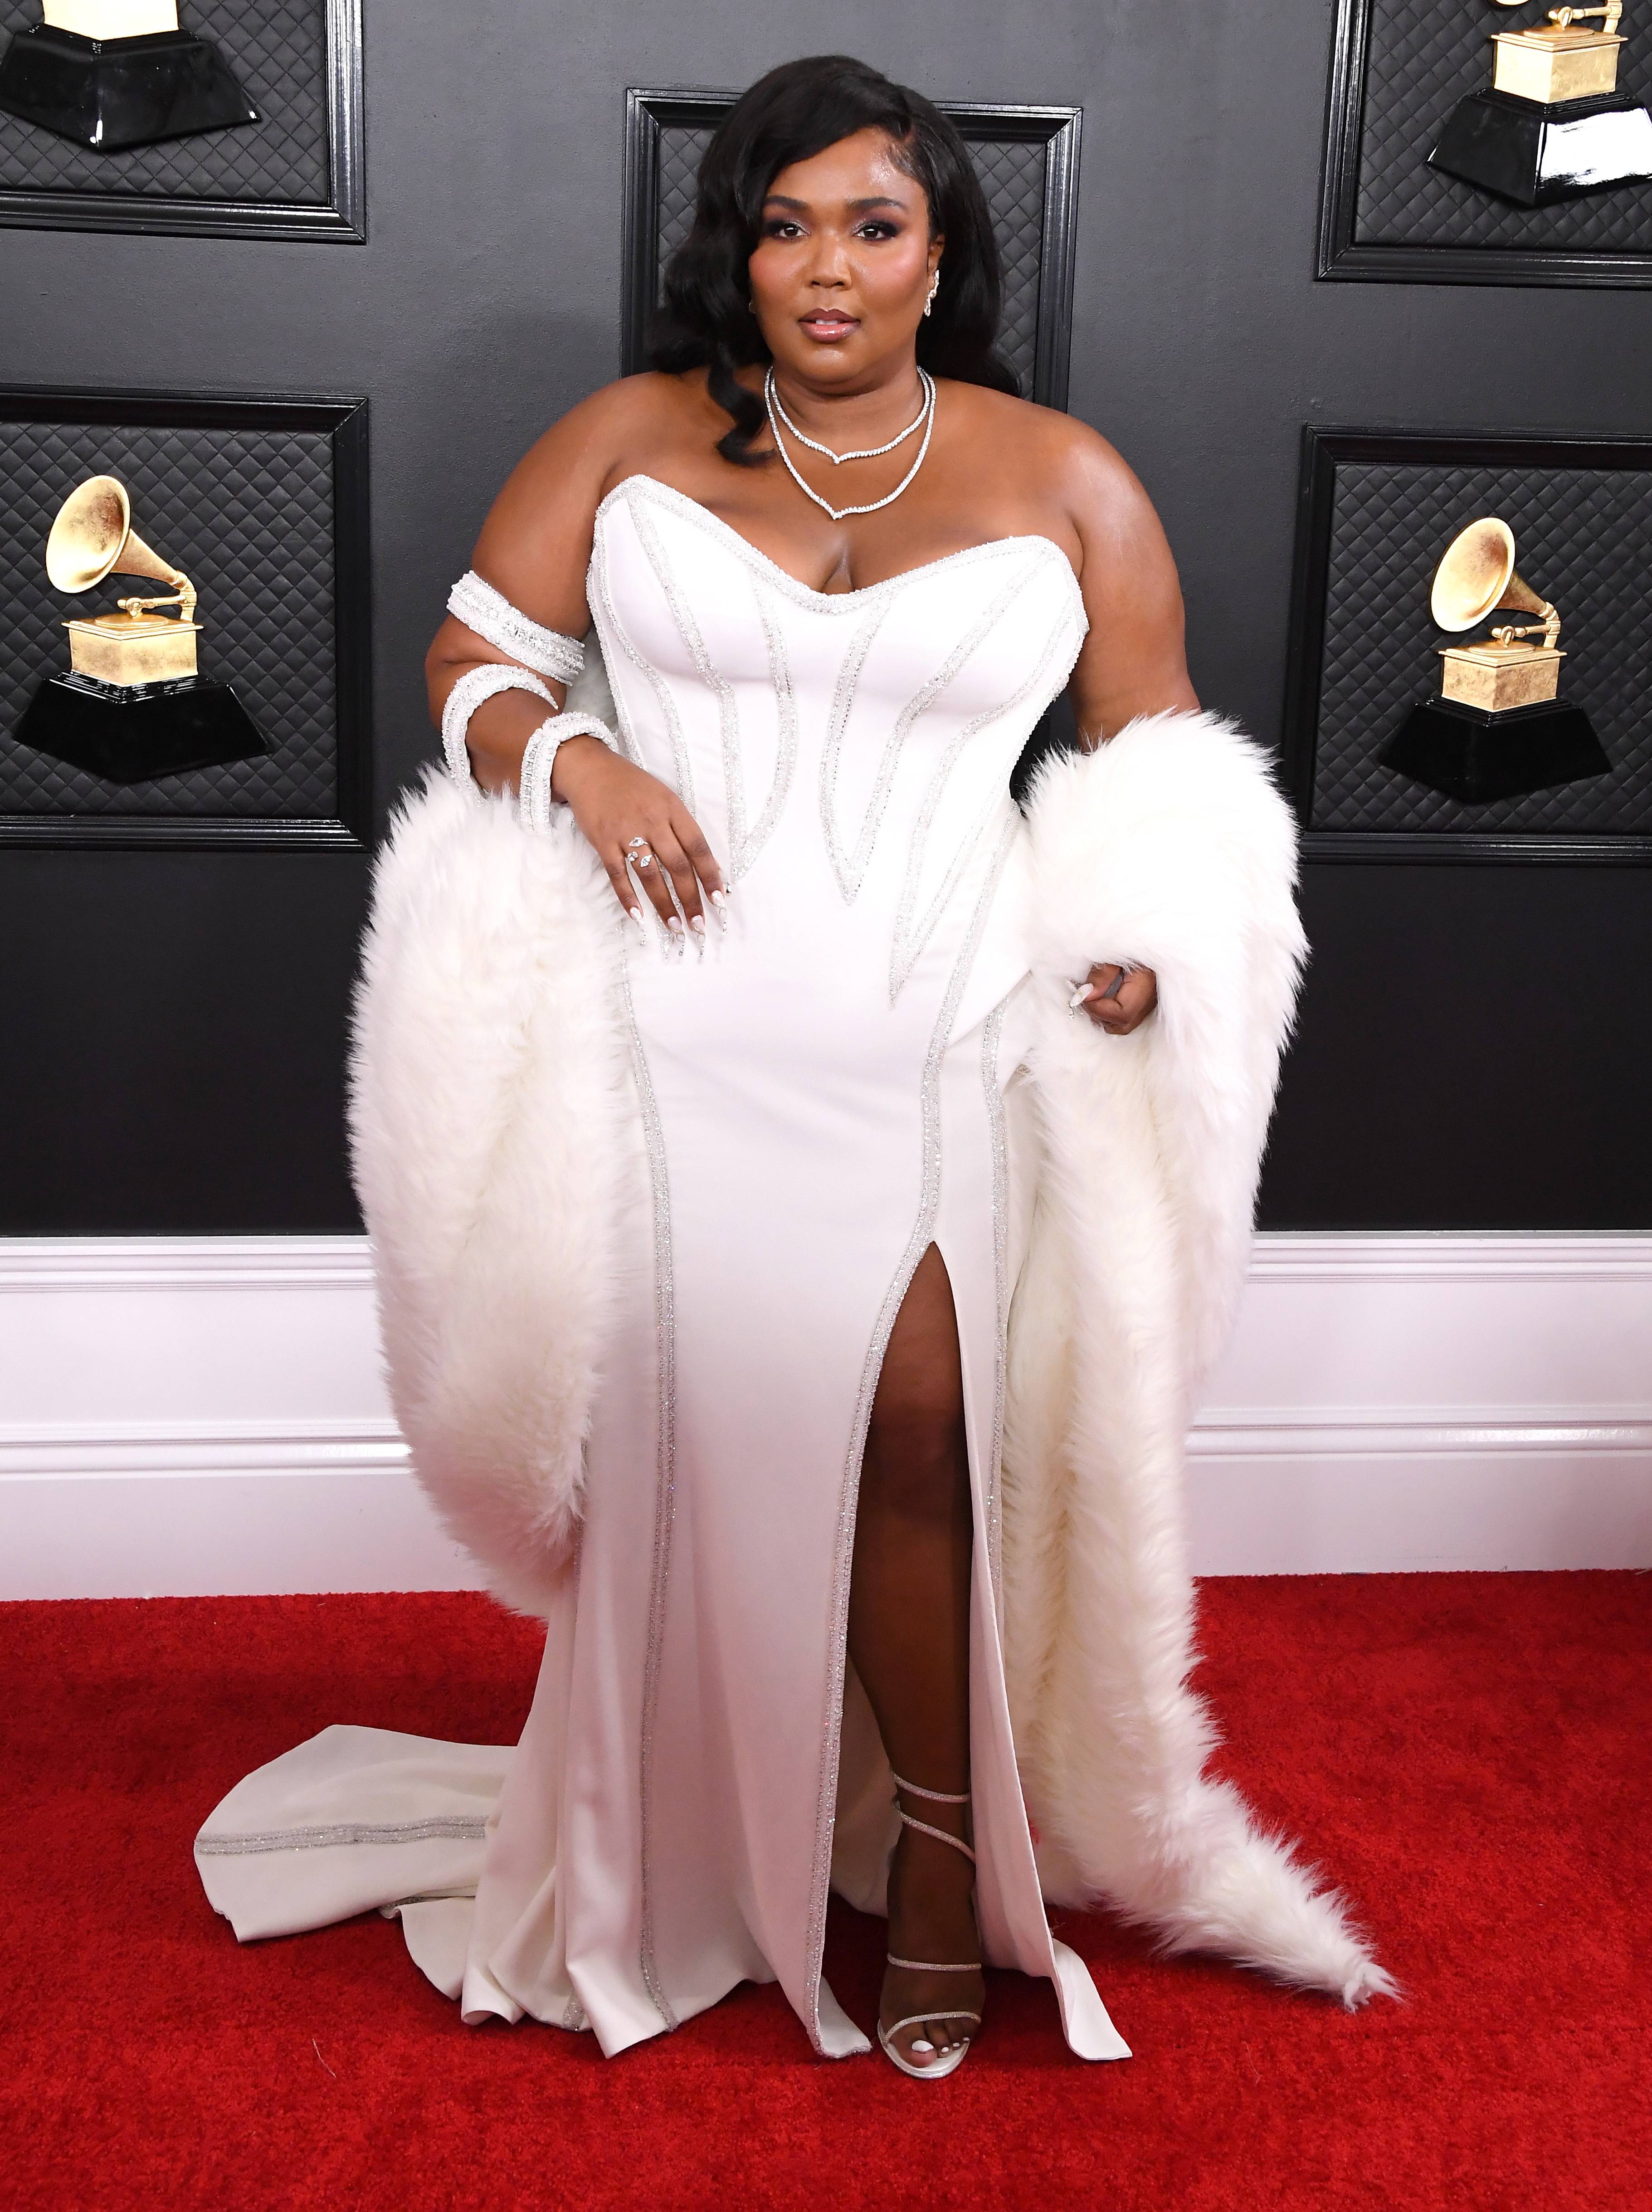 LOS ANGELES, CALIFORNIA - JANUARY 26:  Lizzo arrives at the 62nd Annual GRAMMY Awards at Staples Center on January 26, 2020 in Los Angeles, California. (Photo by Steve Granitz/WireImage)